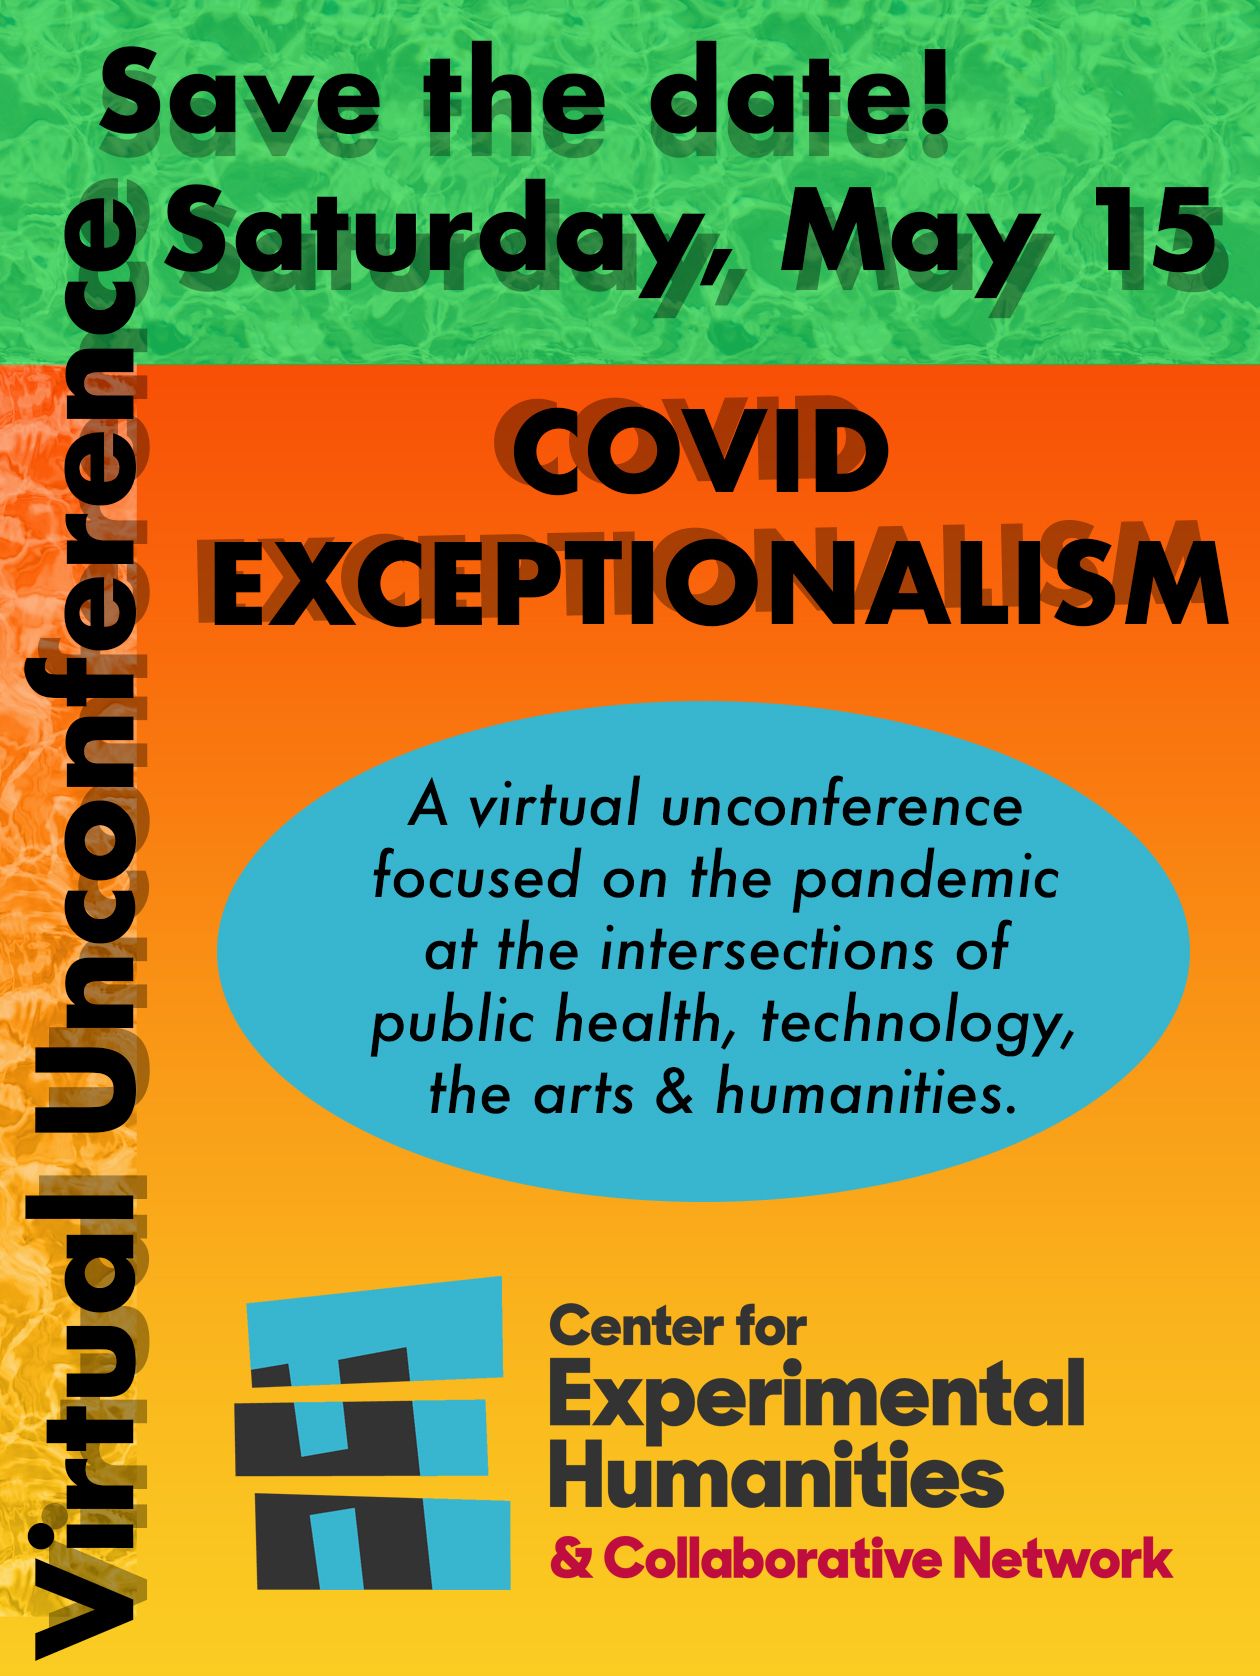 Poster: Save the date! Saturday, May 15, COVID Exceptionalism: A virtual unconference focused on the pandemic at the intersections of public health, technology, the arts & humanities.